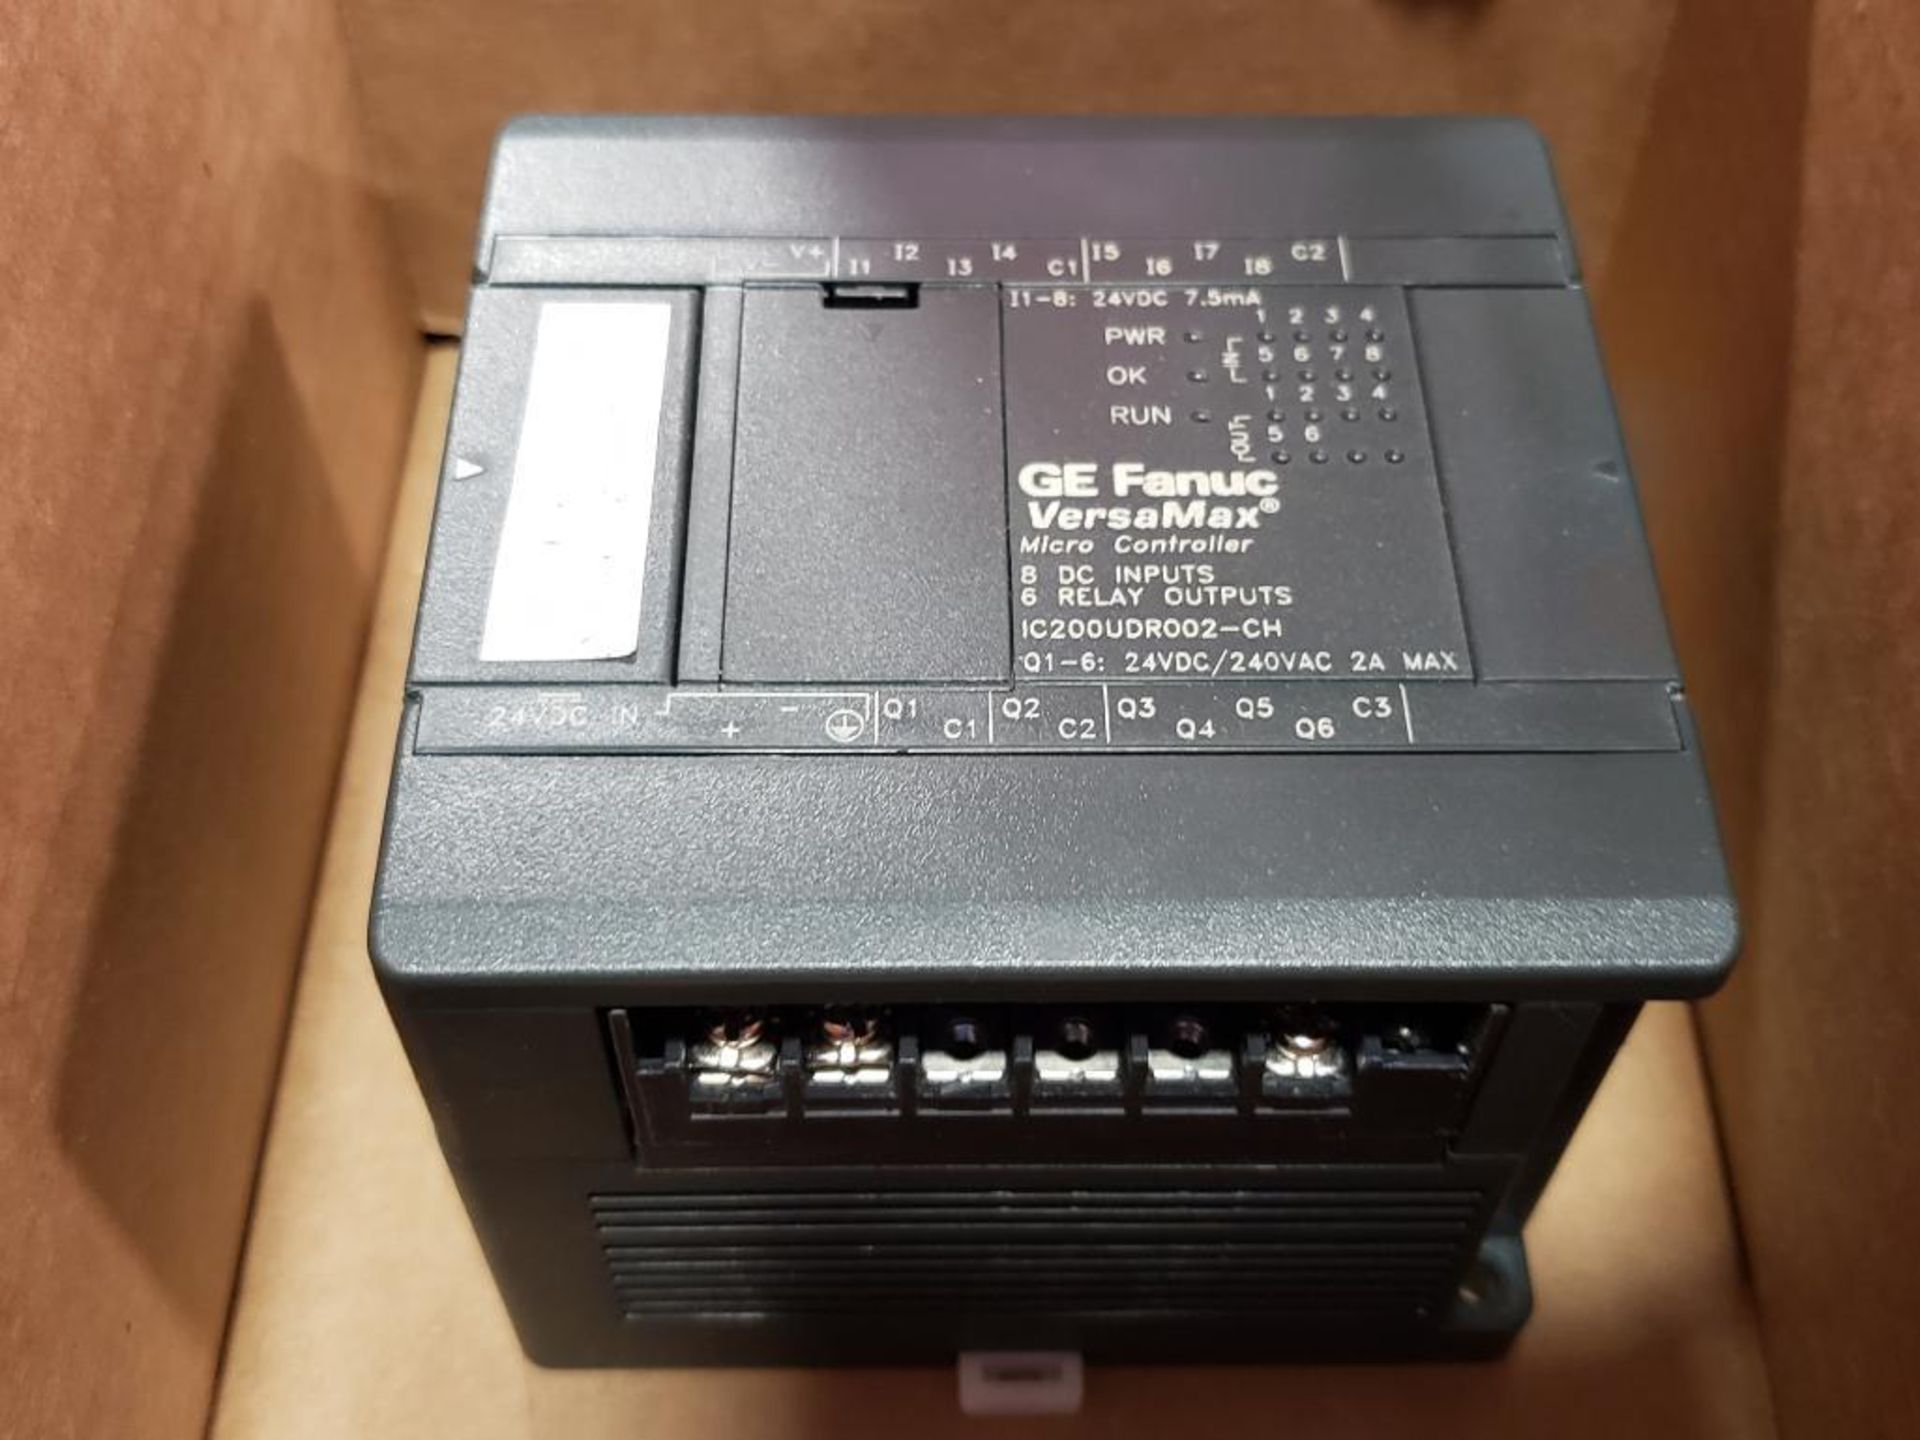 GR Fanuc VersaMax micro controller. IC200UDR002-CH. - Image 2 of 4